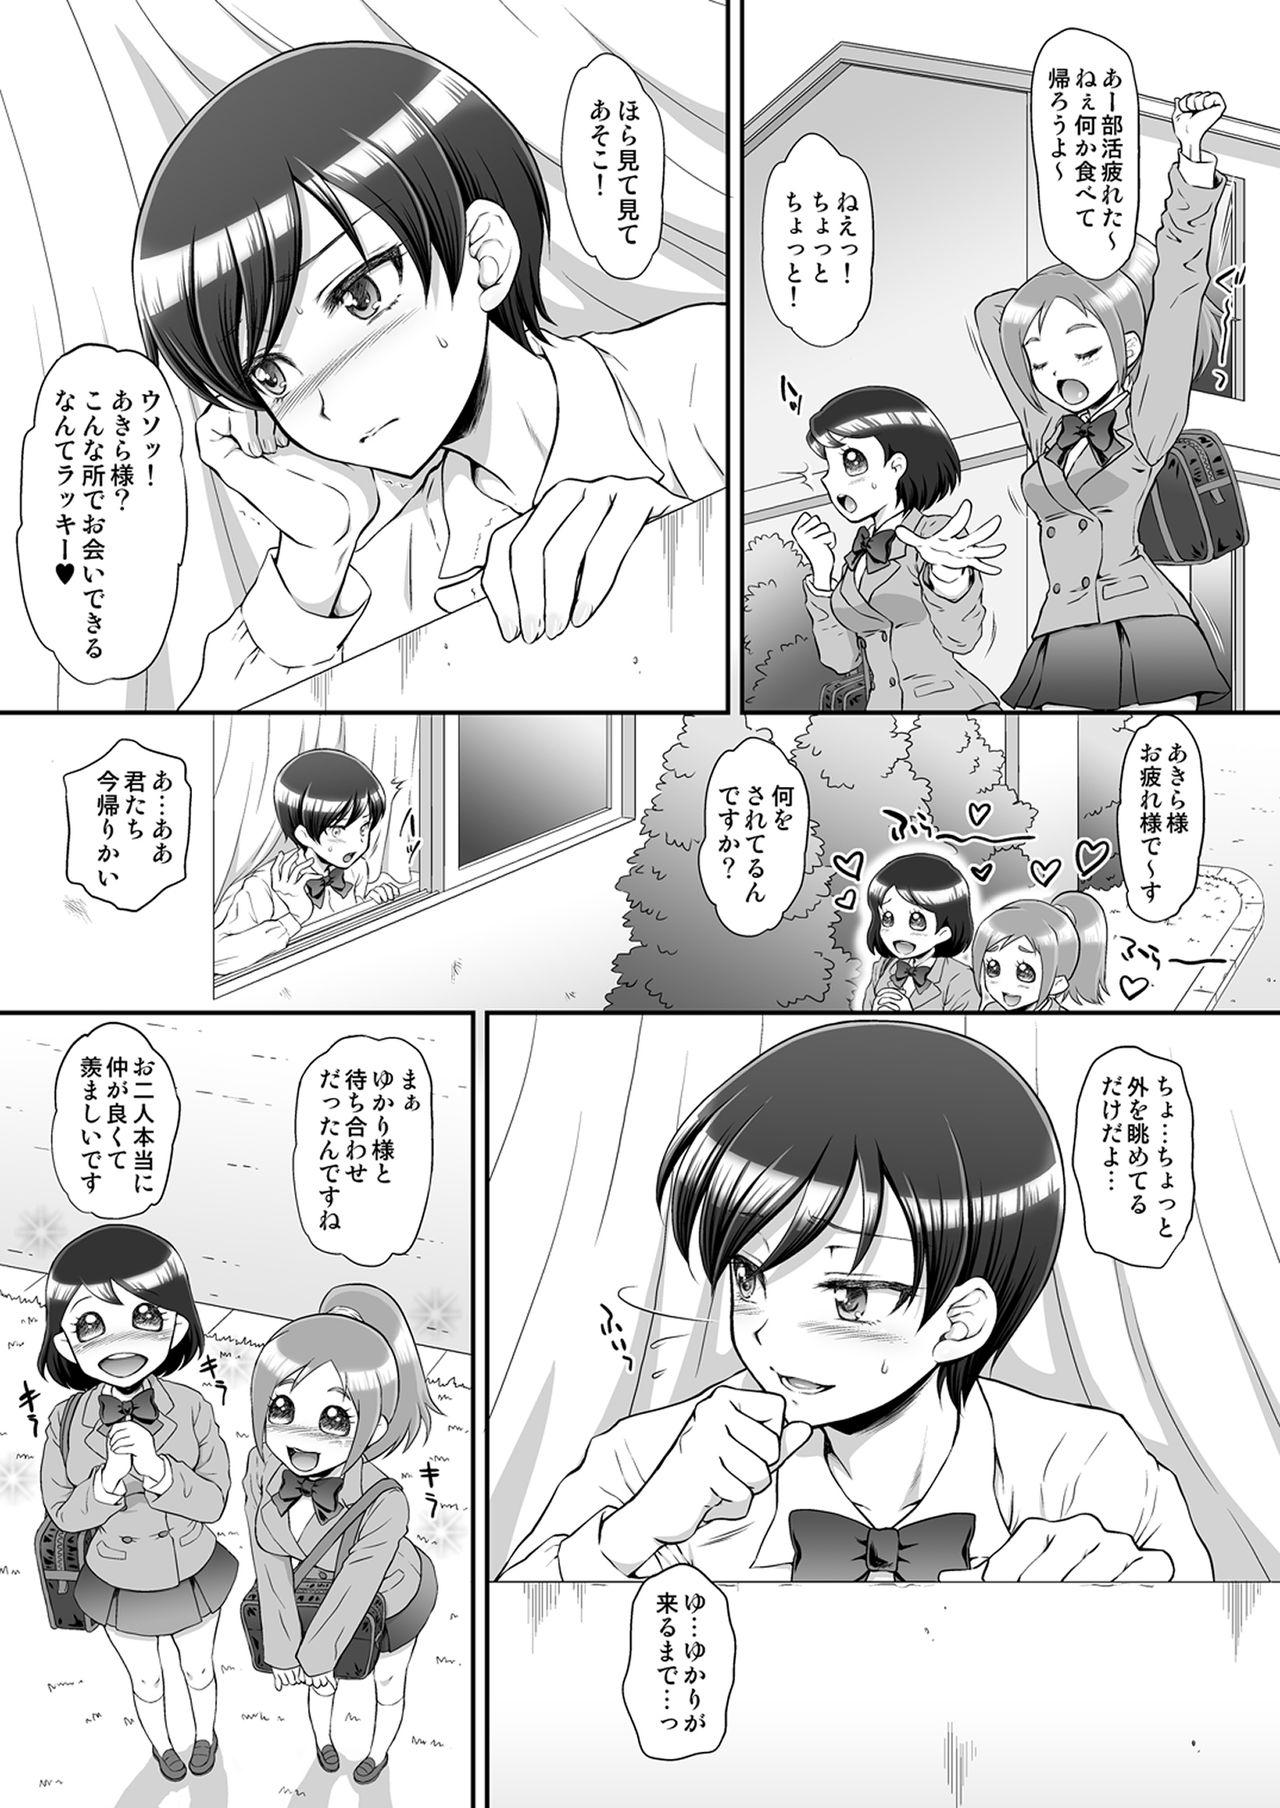 Gaycum Omakebon Collection 2 - Pretty cure Jacking - Page 3